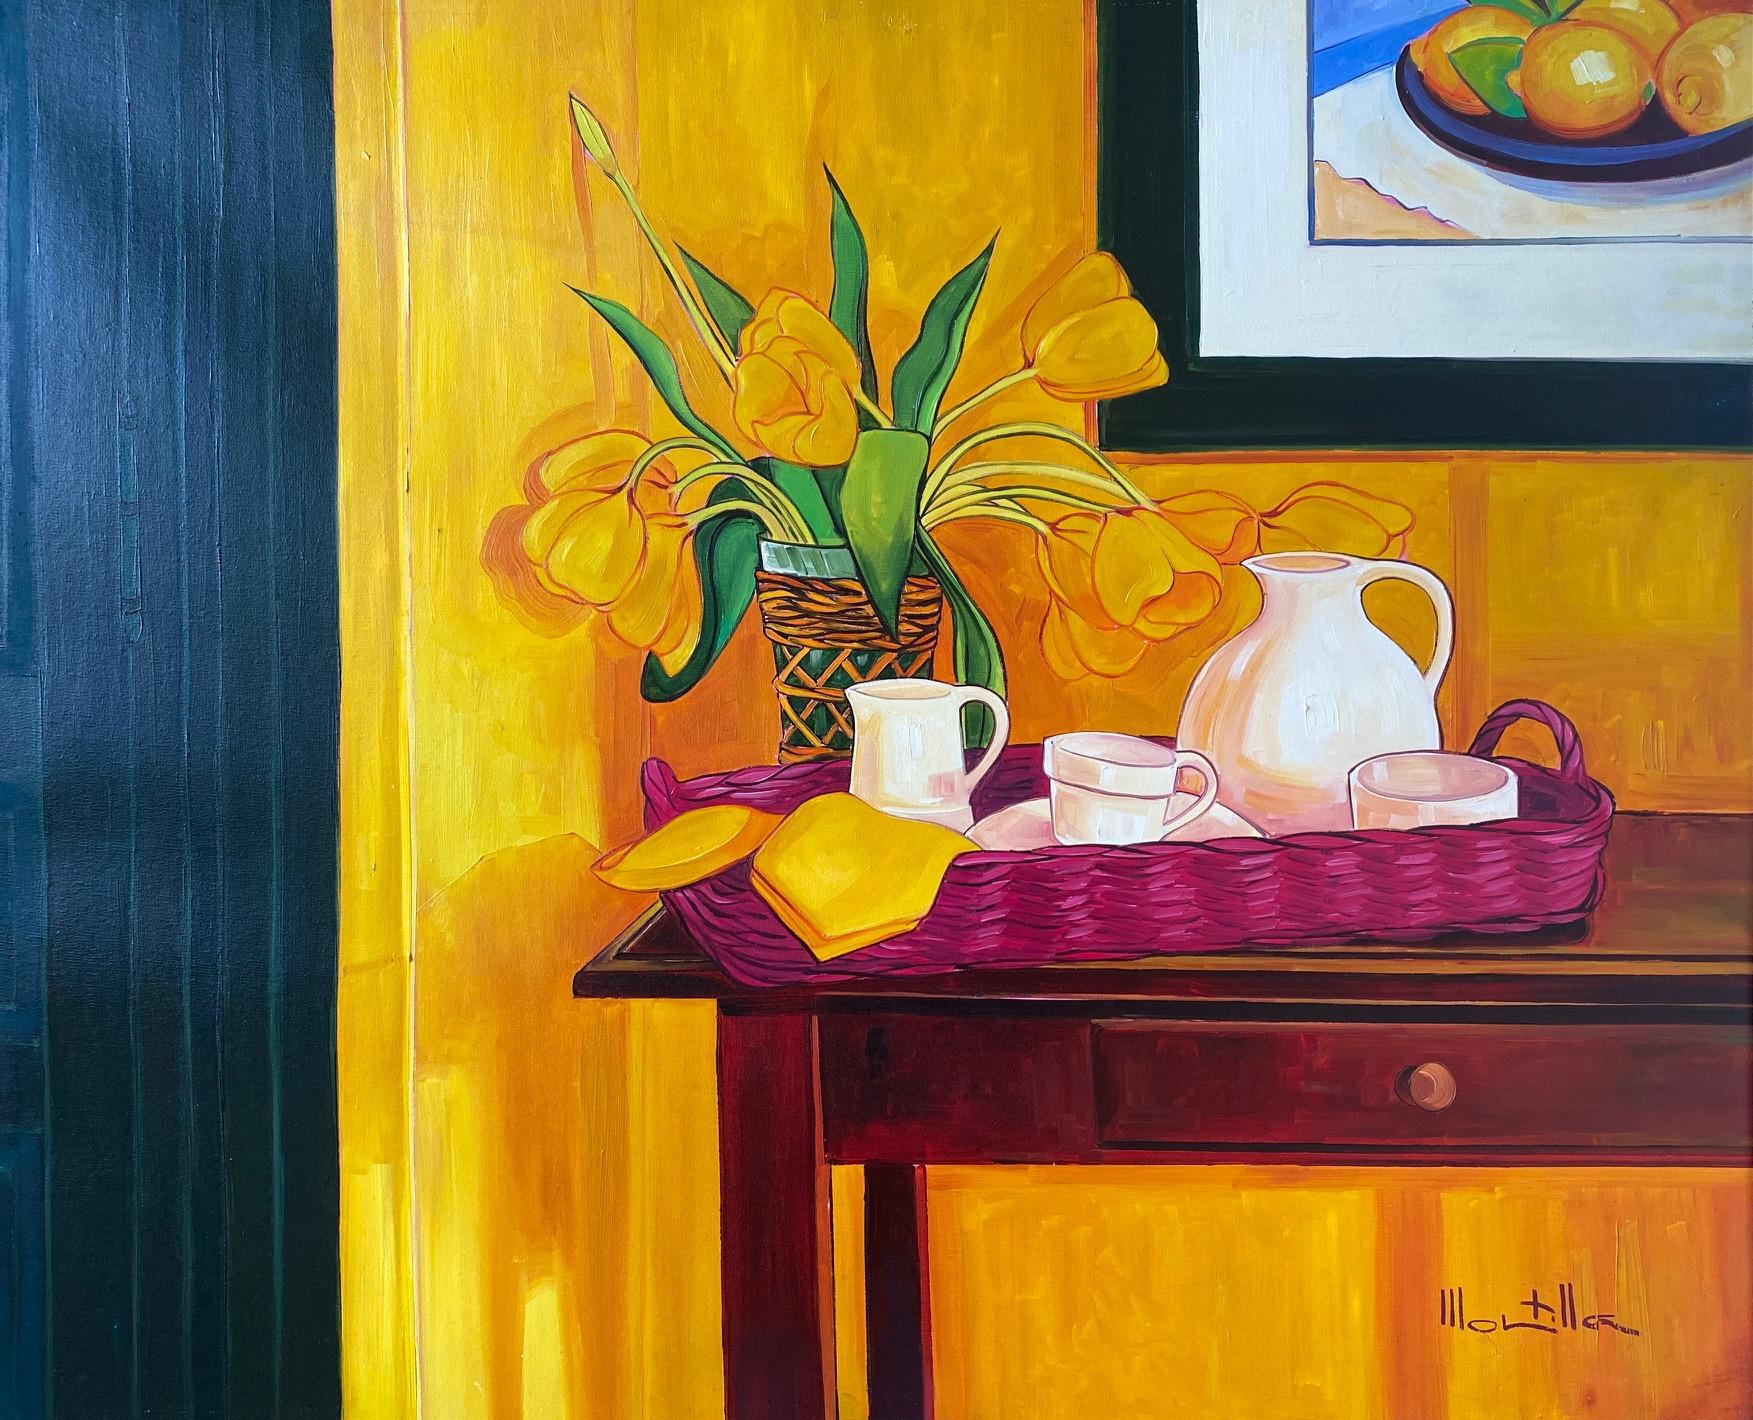 Chico Montilla Figurative Painting - Yelow tulips. Colorful expressionist still-life: flowers, tea try. Oil on canvas